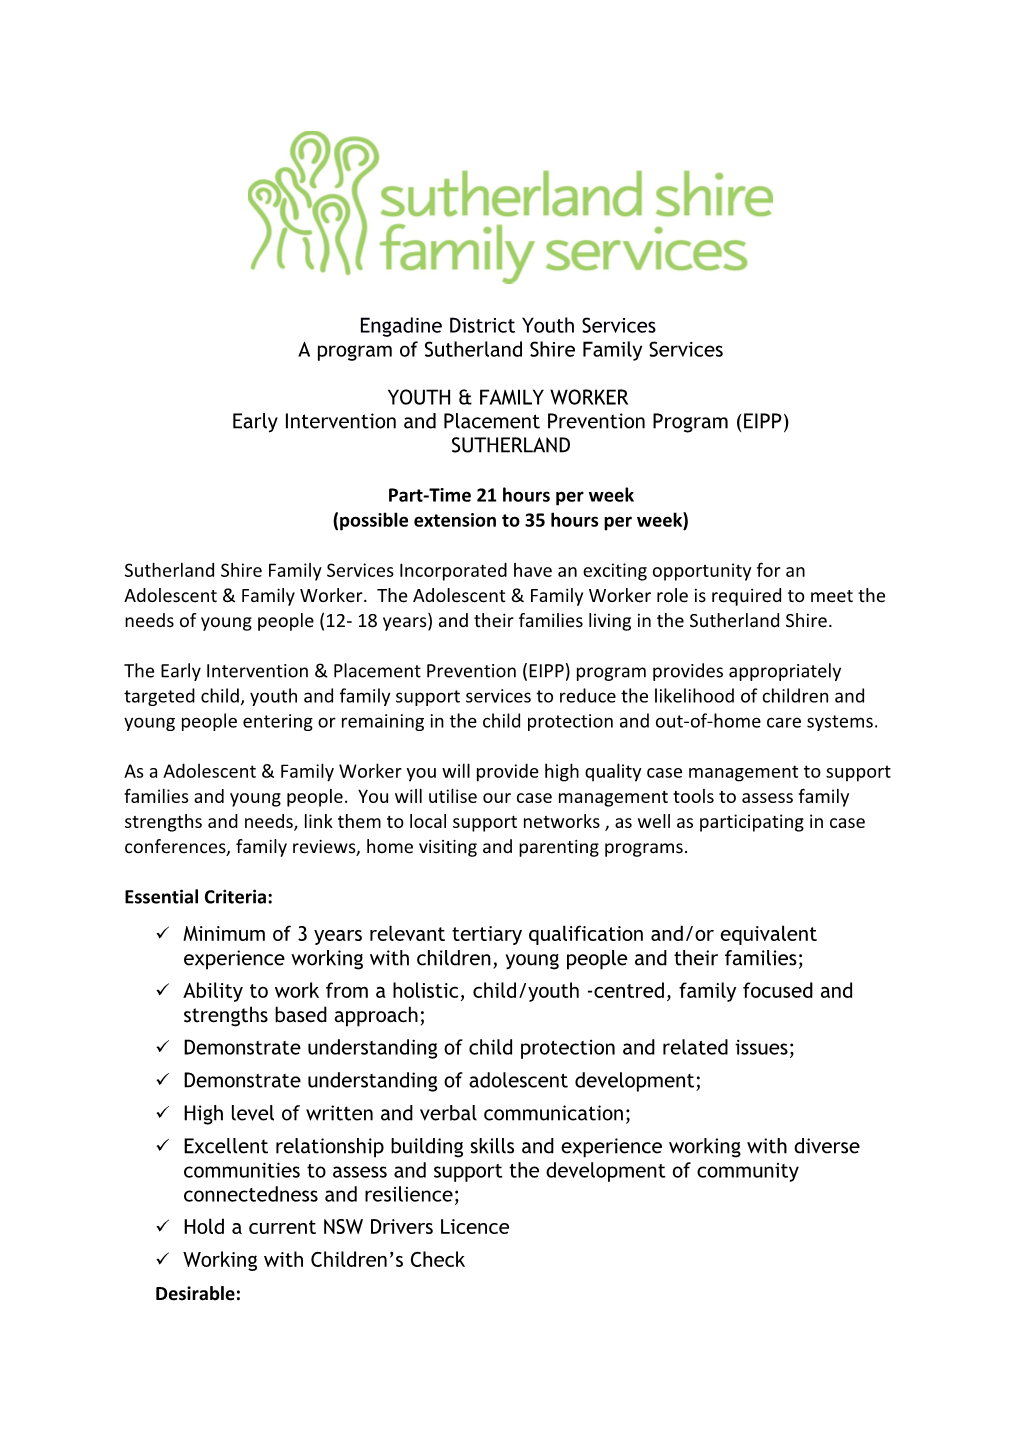 A Program of Sutherland Shire Family Services